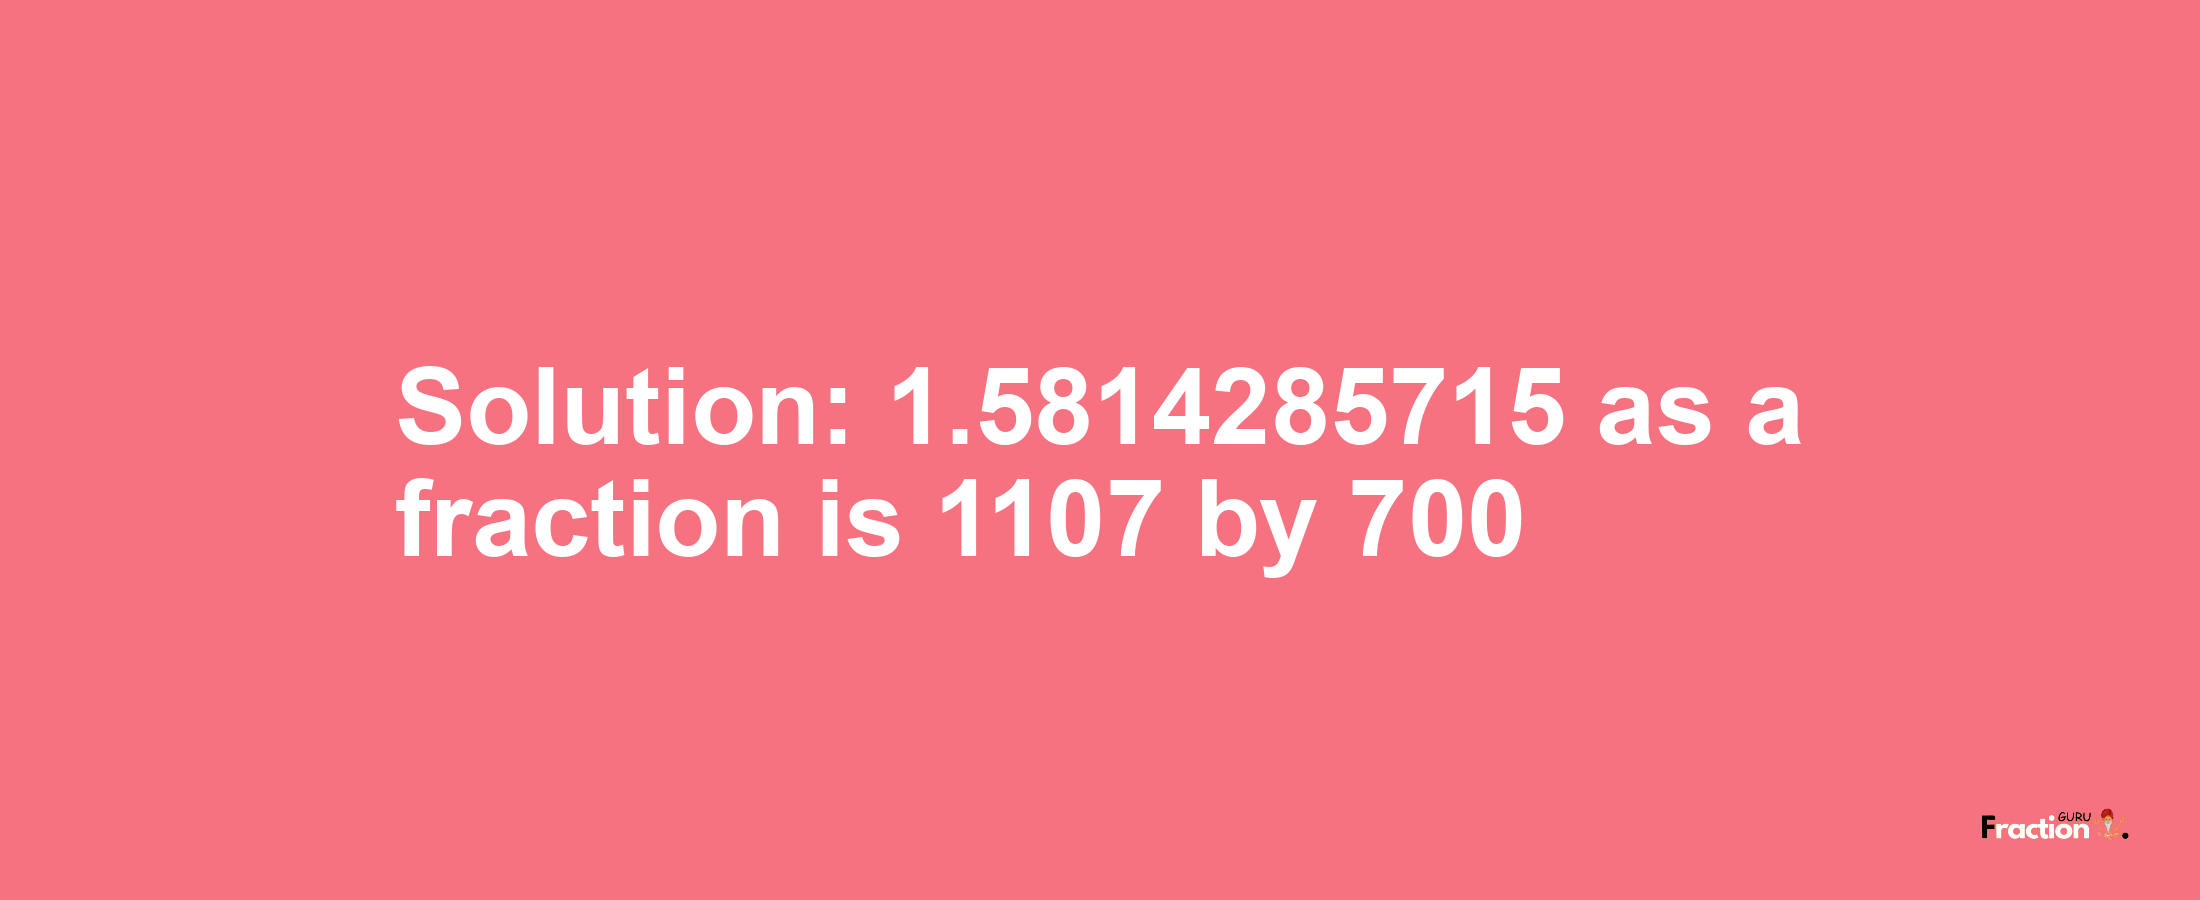 Solution:1.5814285715 as a fraction is 1107/700